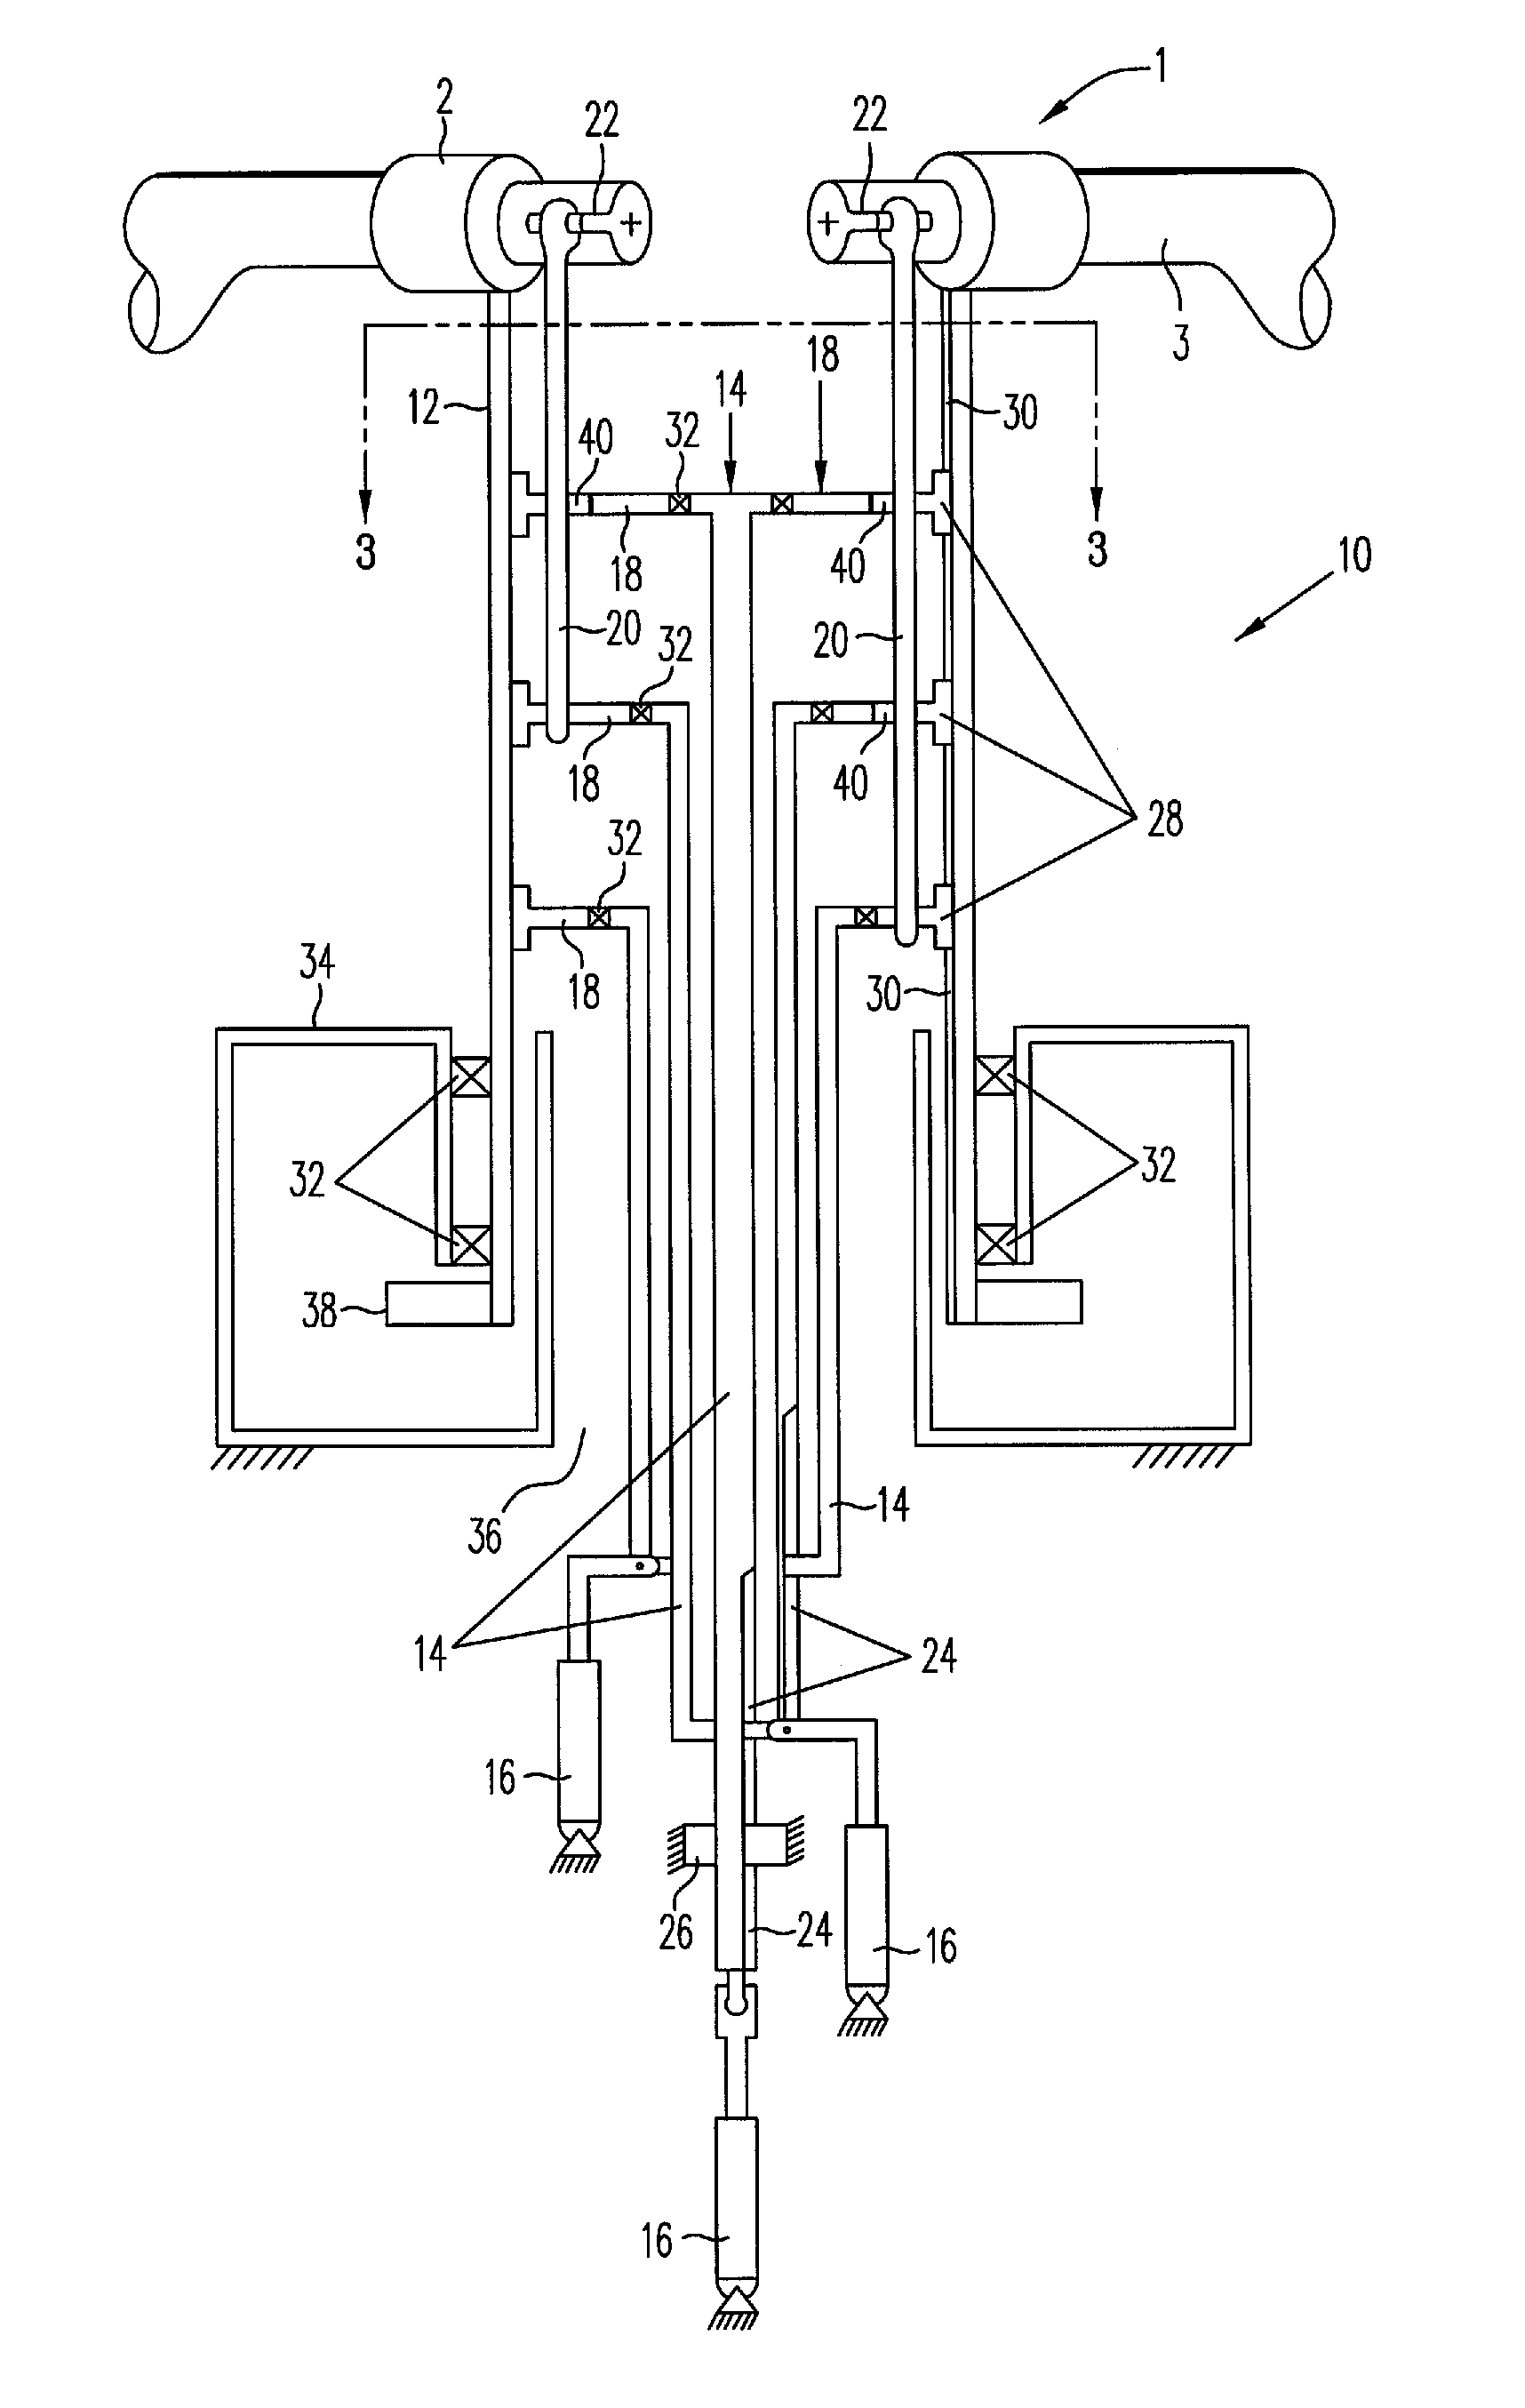 Rotor Blade Pitch Control